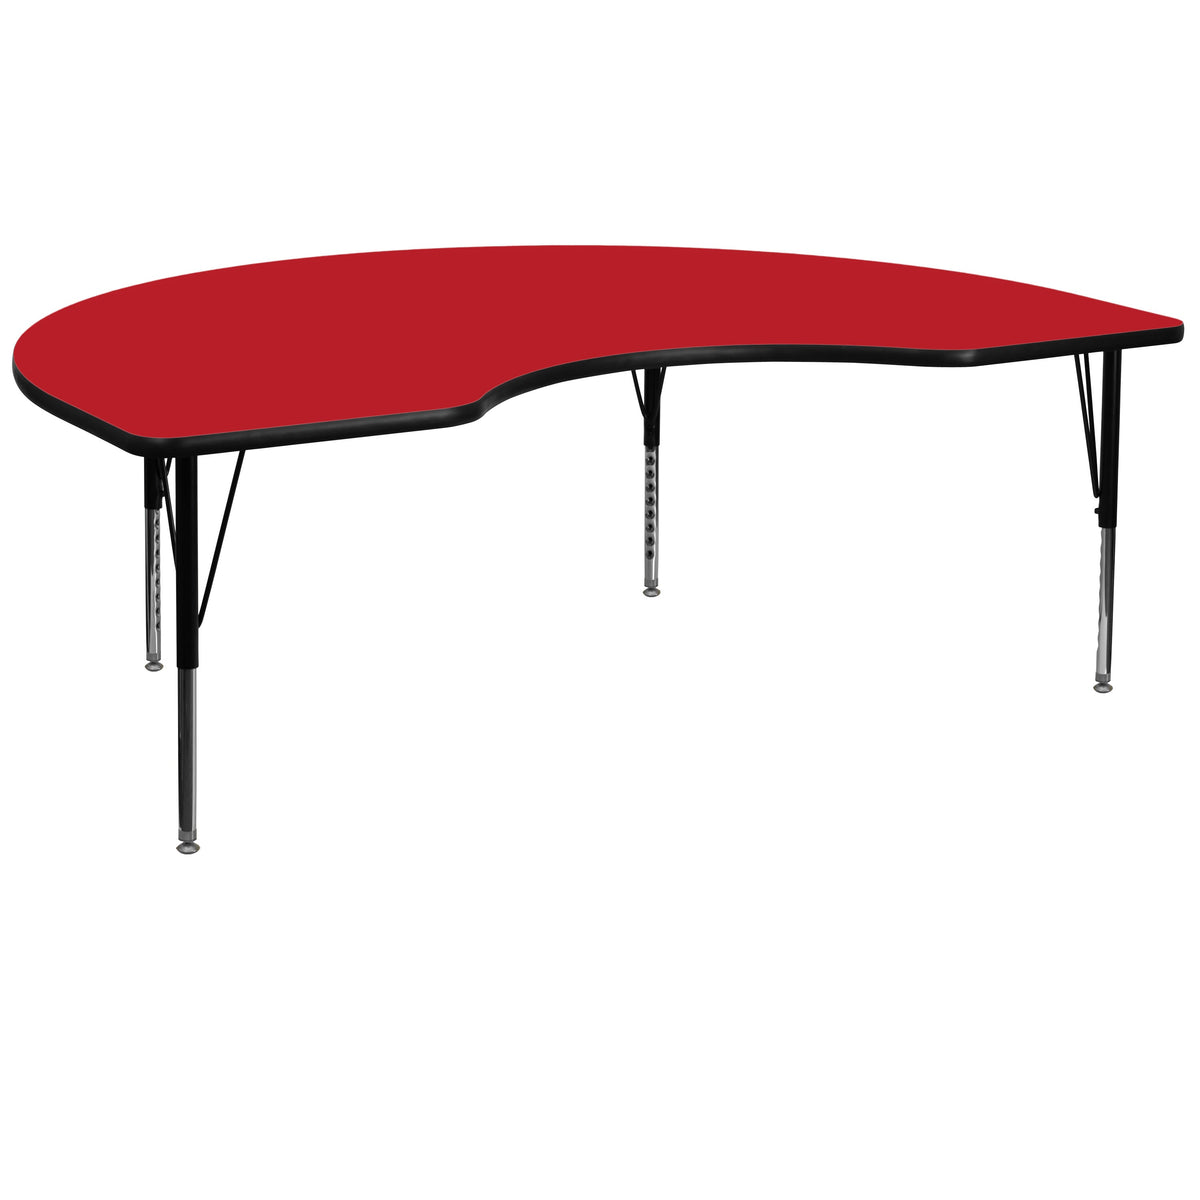 Red |#| 48inchW x 72inchL Kidney Red HP Laminate Activity Table - Height Adjustable Short Legs